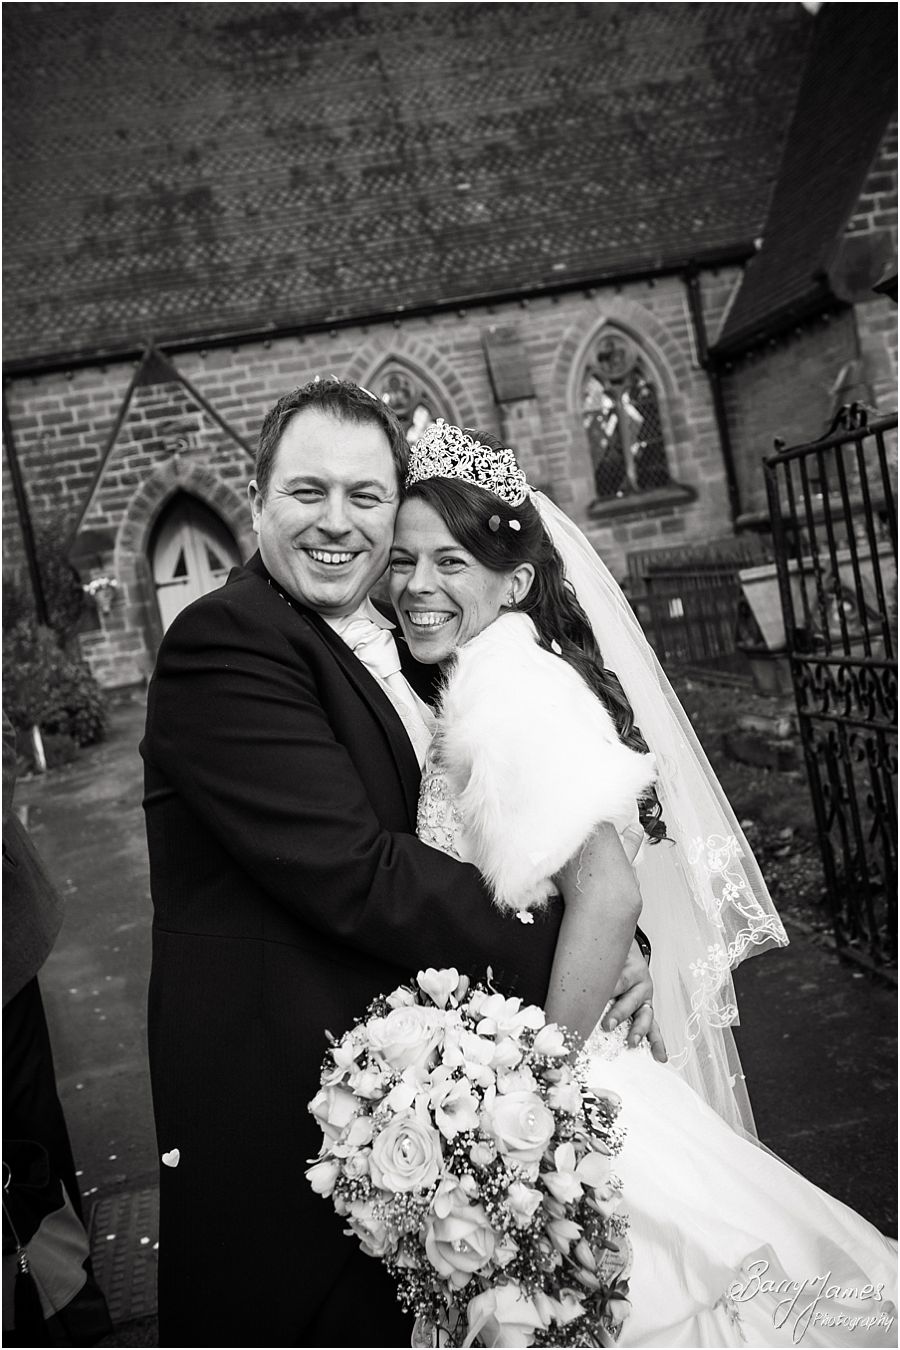 Contemporary and creative wedding photographs at St Pauls Church in Coven by Staffordshire Wedding Photographer Barry James